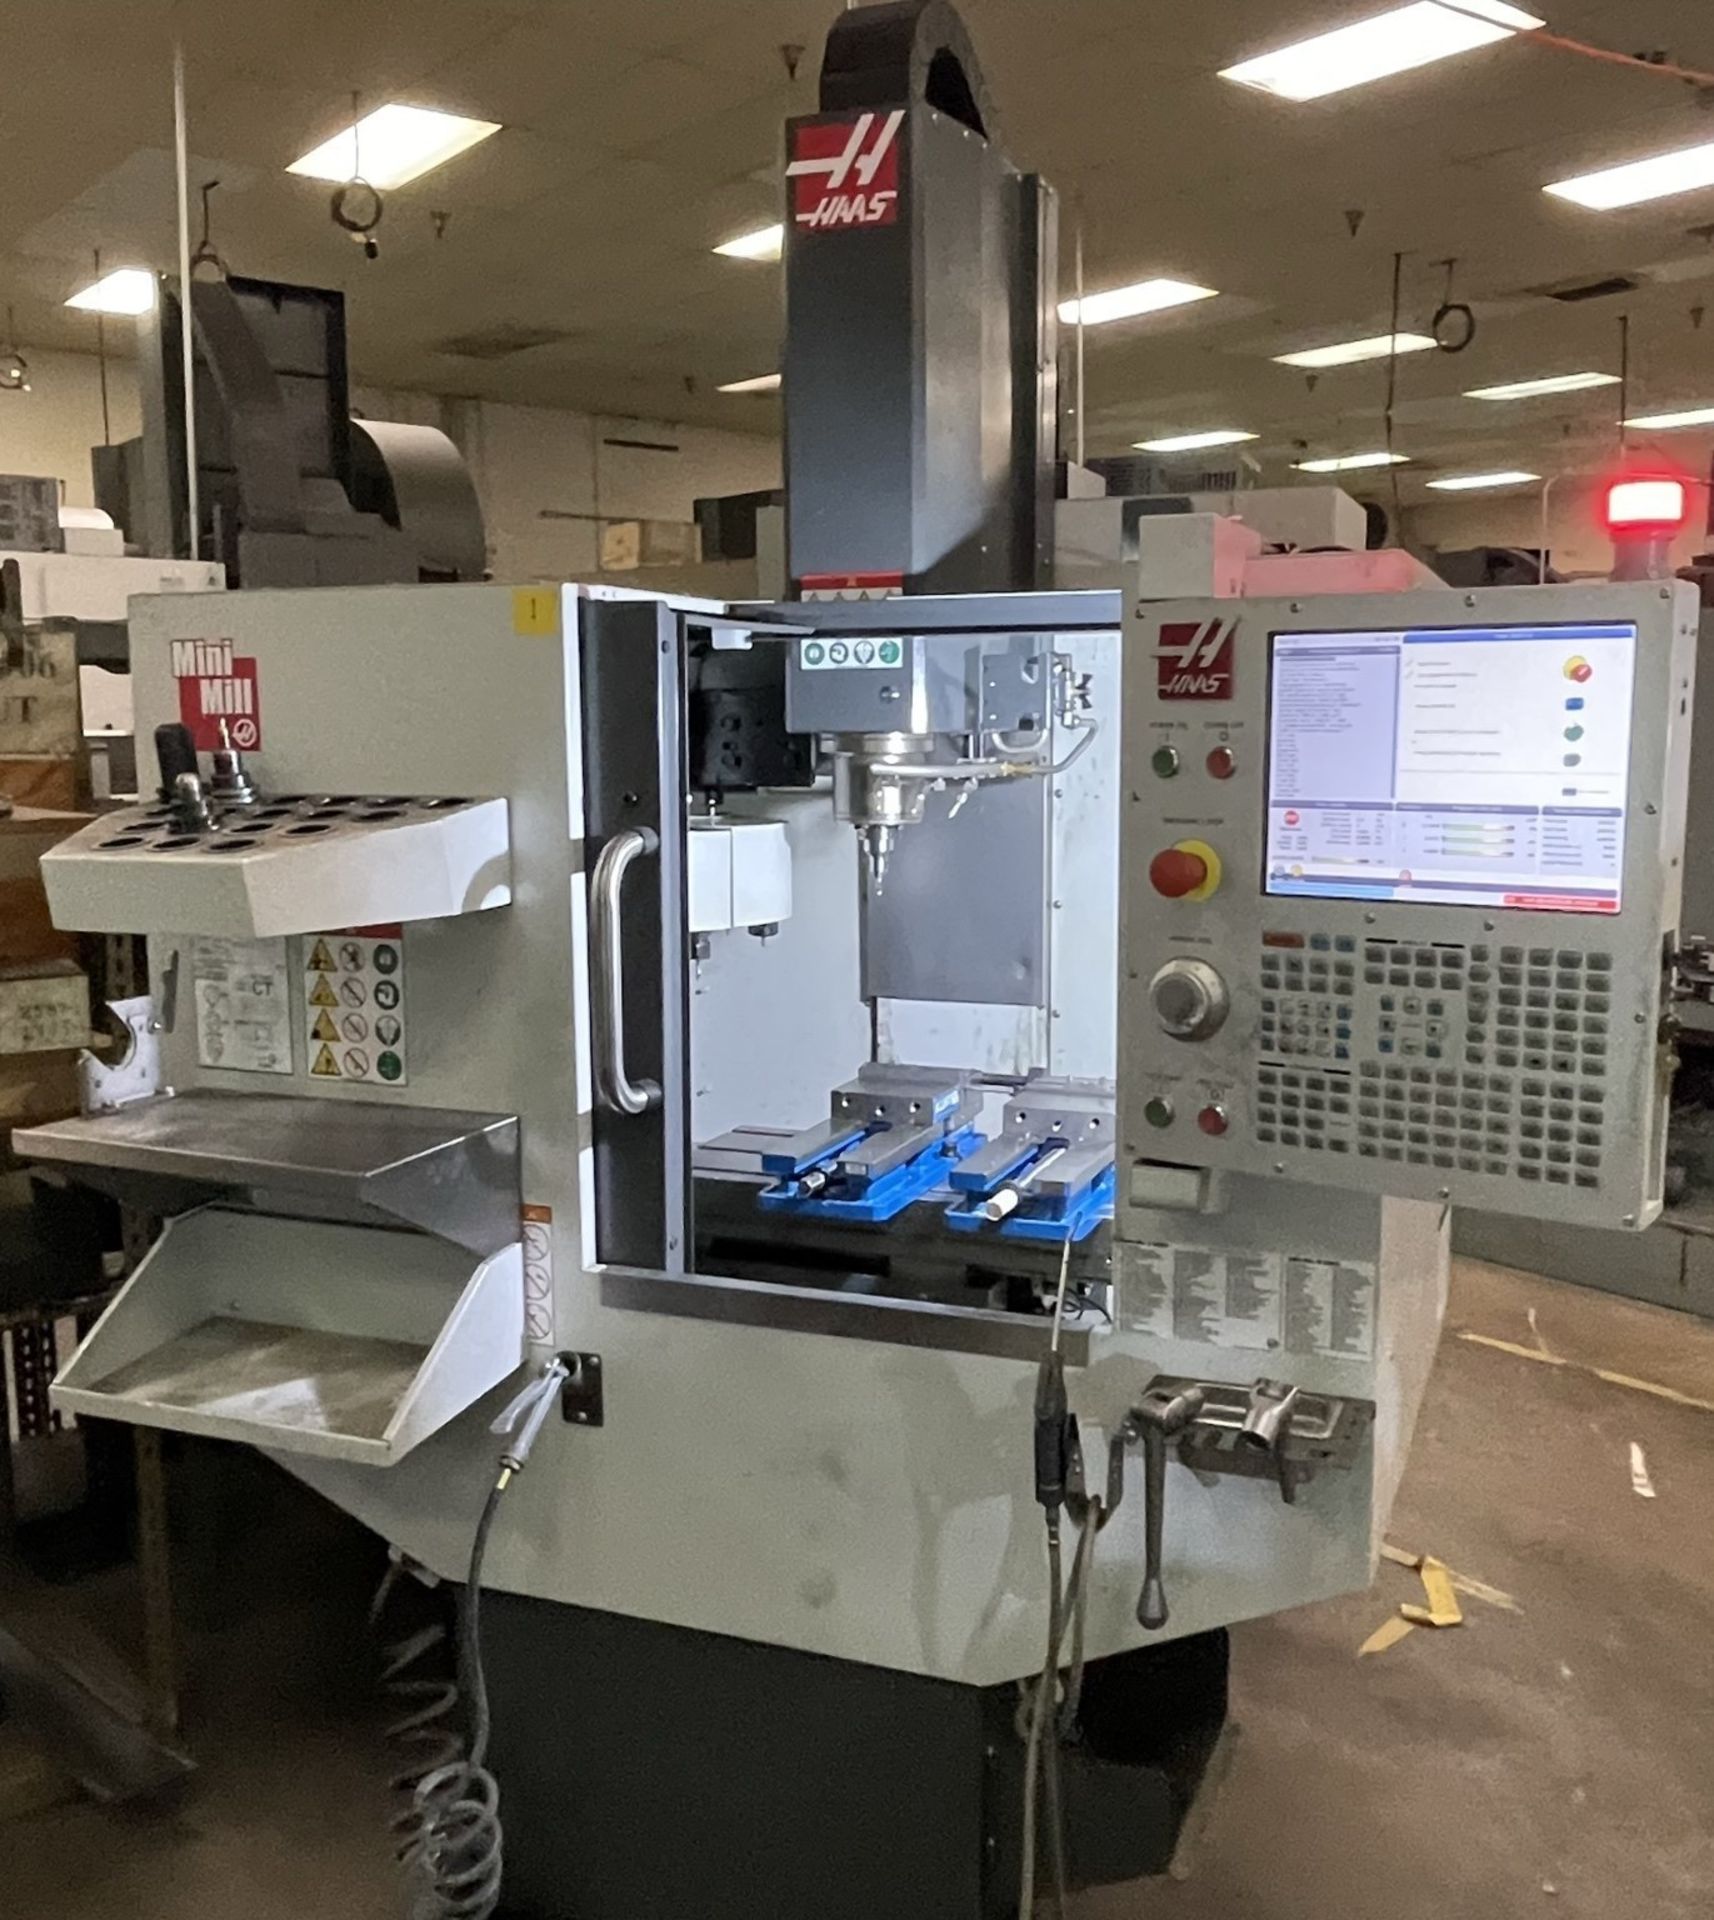 HAAS Mini Mill CNC Vertical Machining Center, Late Model, Low Hours, New 2019 *Off-Site* - Image 2 of 5